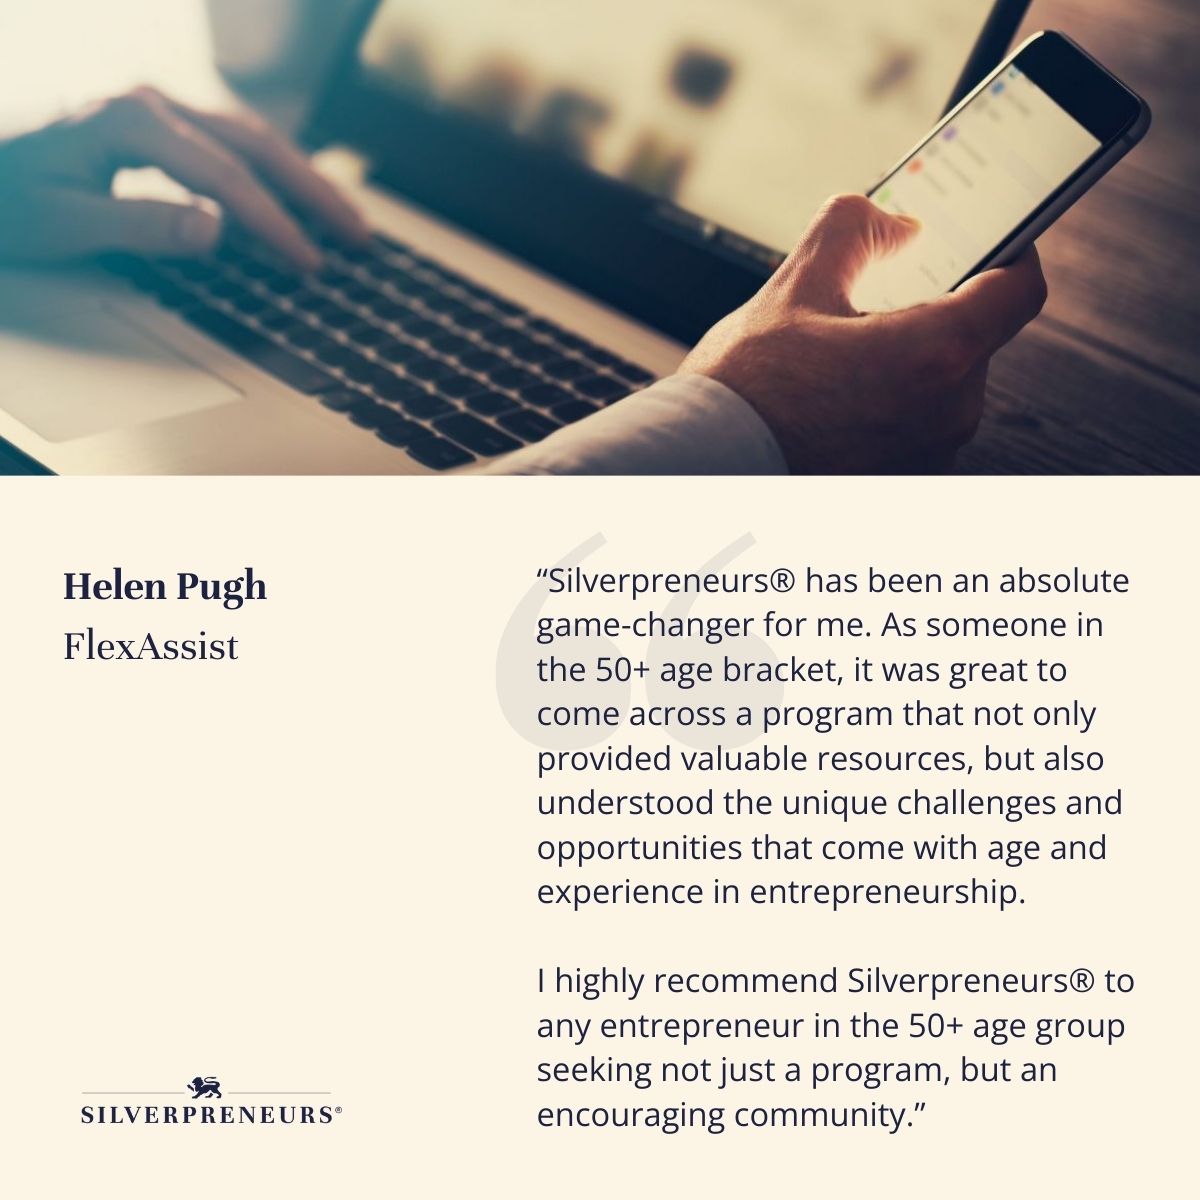 We love hearing all the amazing feedback from our programme attendee's. Knowing it has had such a positive impact on their business journey is fantastic to hear.

To APPLY for Cohort 2 visit bit.ly/48poM39

#UKSPF #Shropshire #InvestinShropshire #LevellingUp